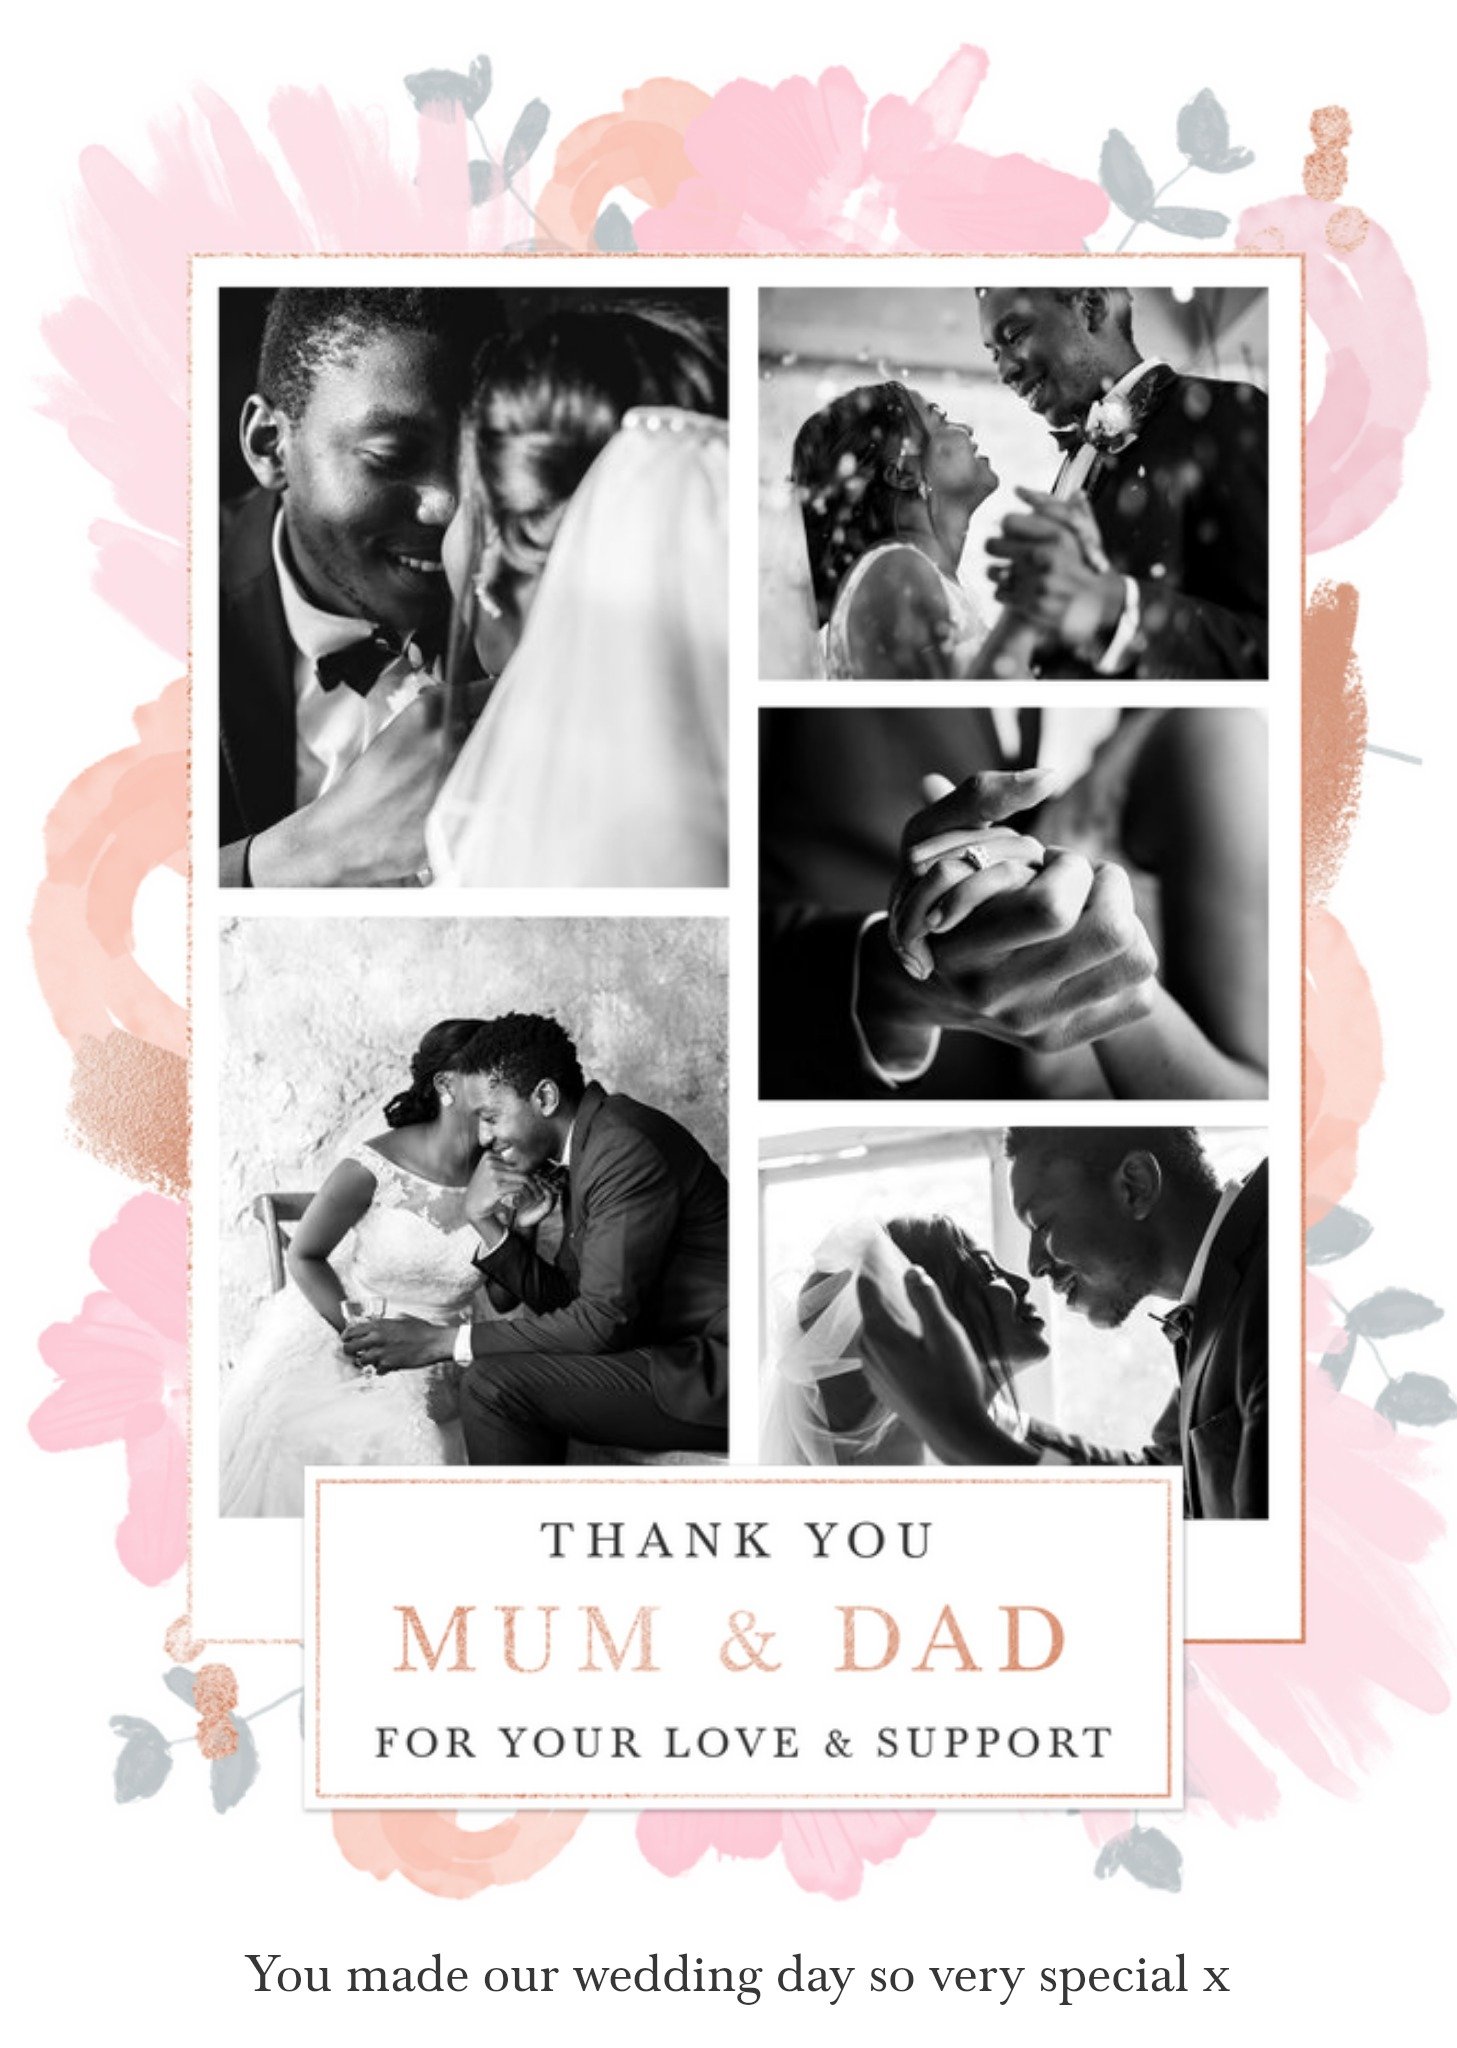 Moonpig Wedding Card - Thank You - Mum & Dad - For Your Love And Support - Photo Upload, Large